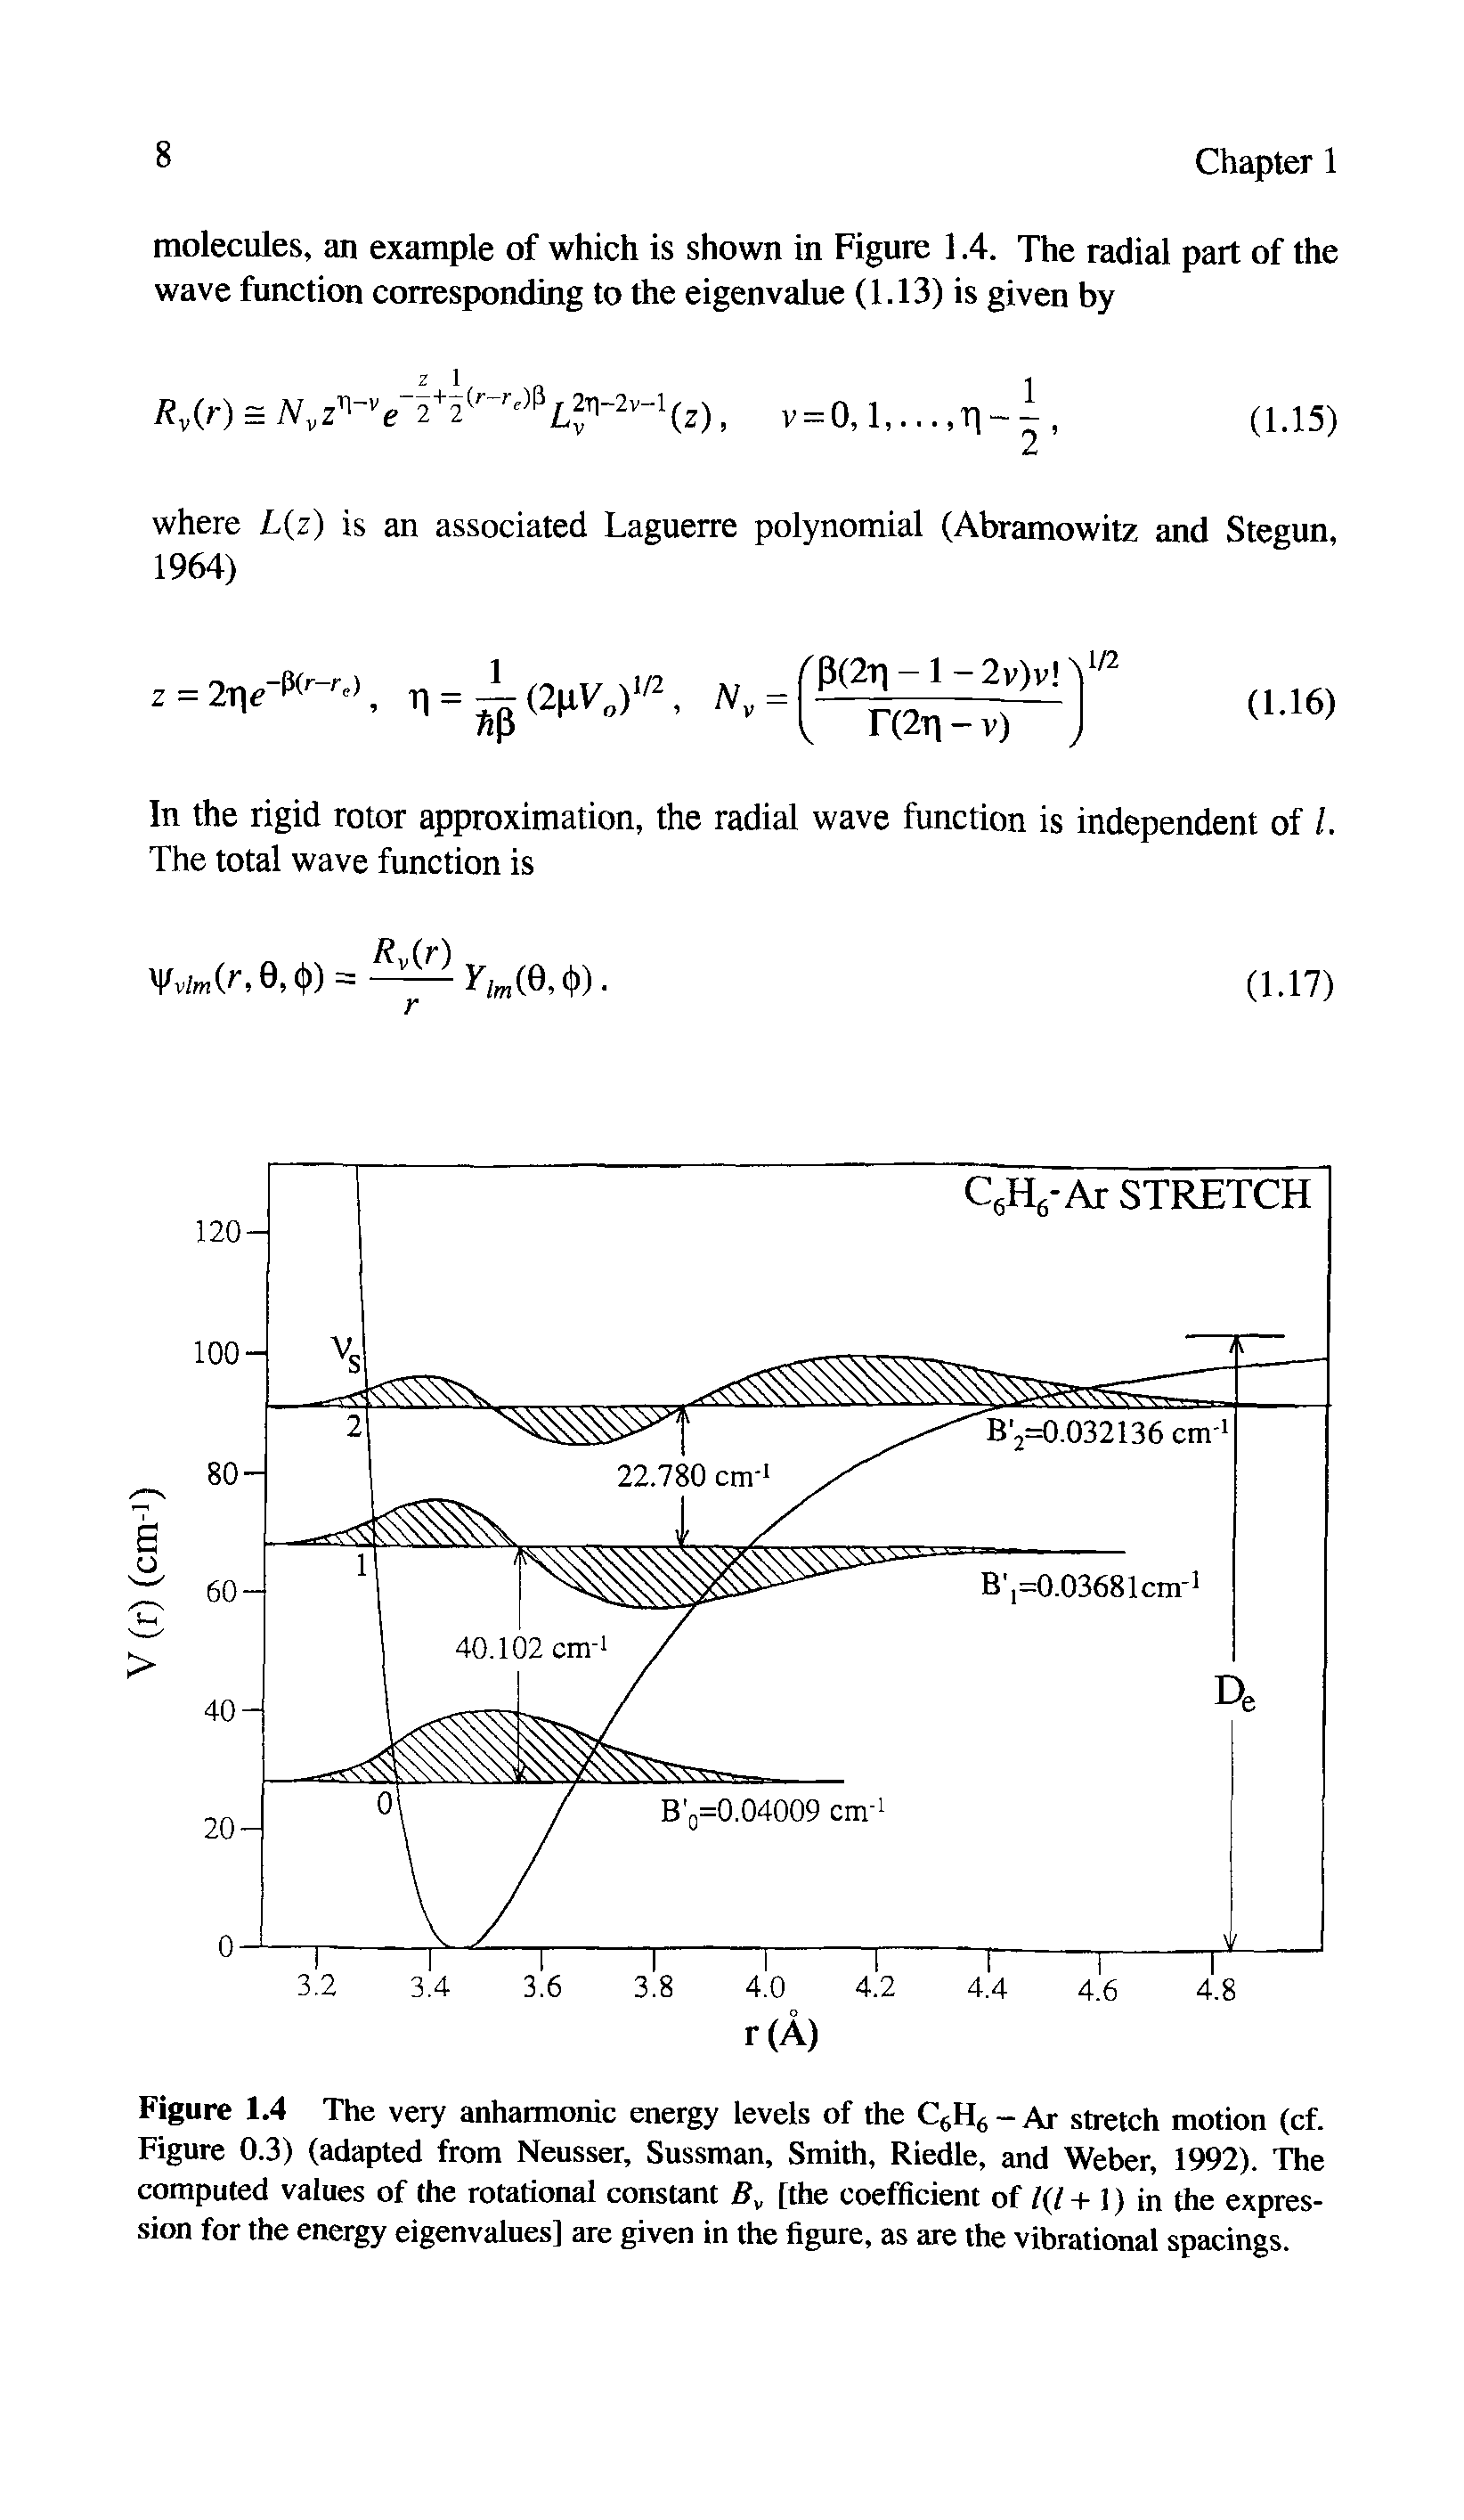 Figure 1.4 The very anharmonic energy levels of the C6H6 - Ar stretch motion (cf. Figure 0.3) (adapted from Neusser, Sussman, Smith, Riedle, and Weber, 1992). The computed values of the rotational constant Bv [the coefficient of 1(1+1) in the expression for the energy eigenvalues] are given in the figure, as are the vibrational spacings.